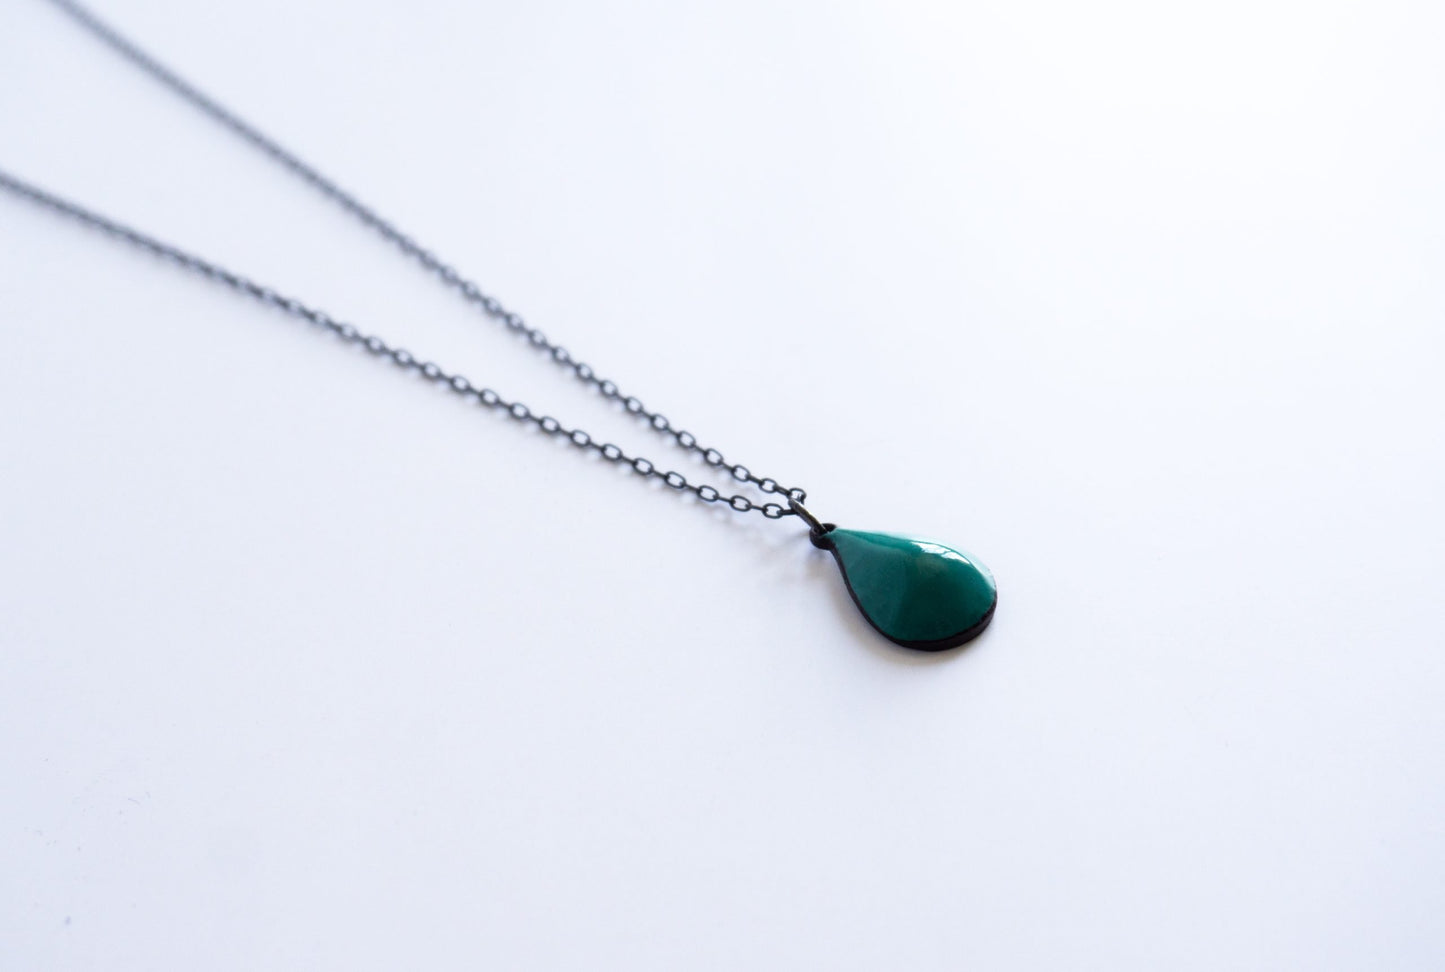 Teal and black drop pendant necklace